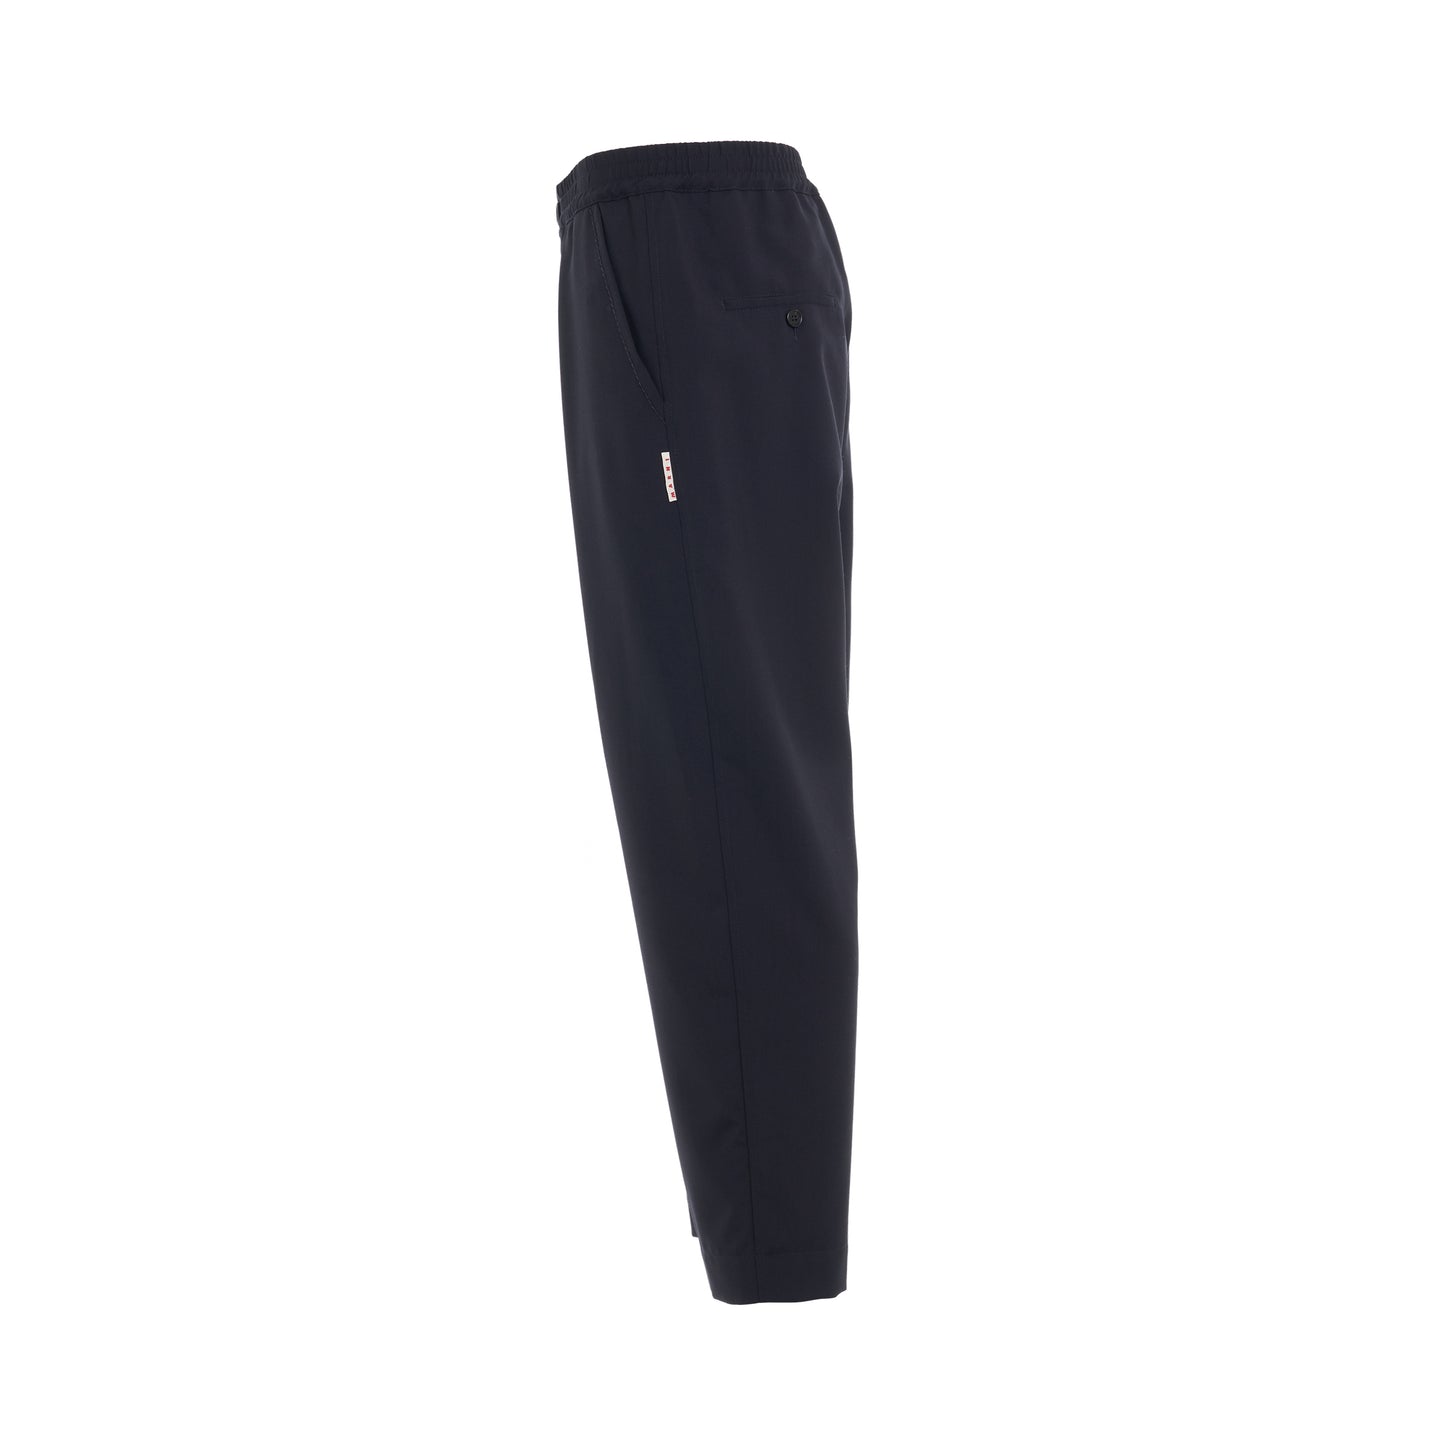 Button Loose Fit Trousers in Blue/Black